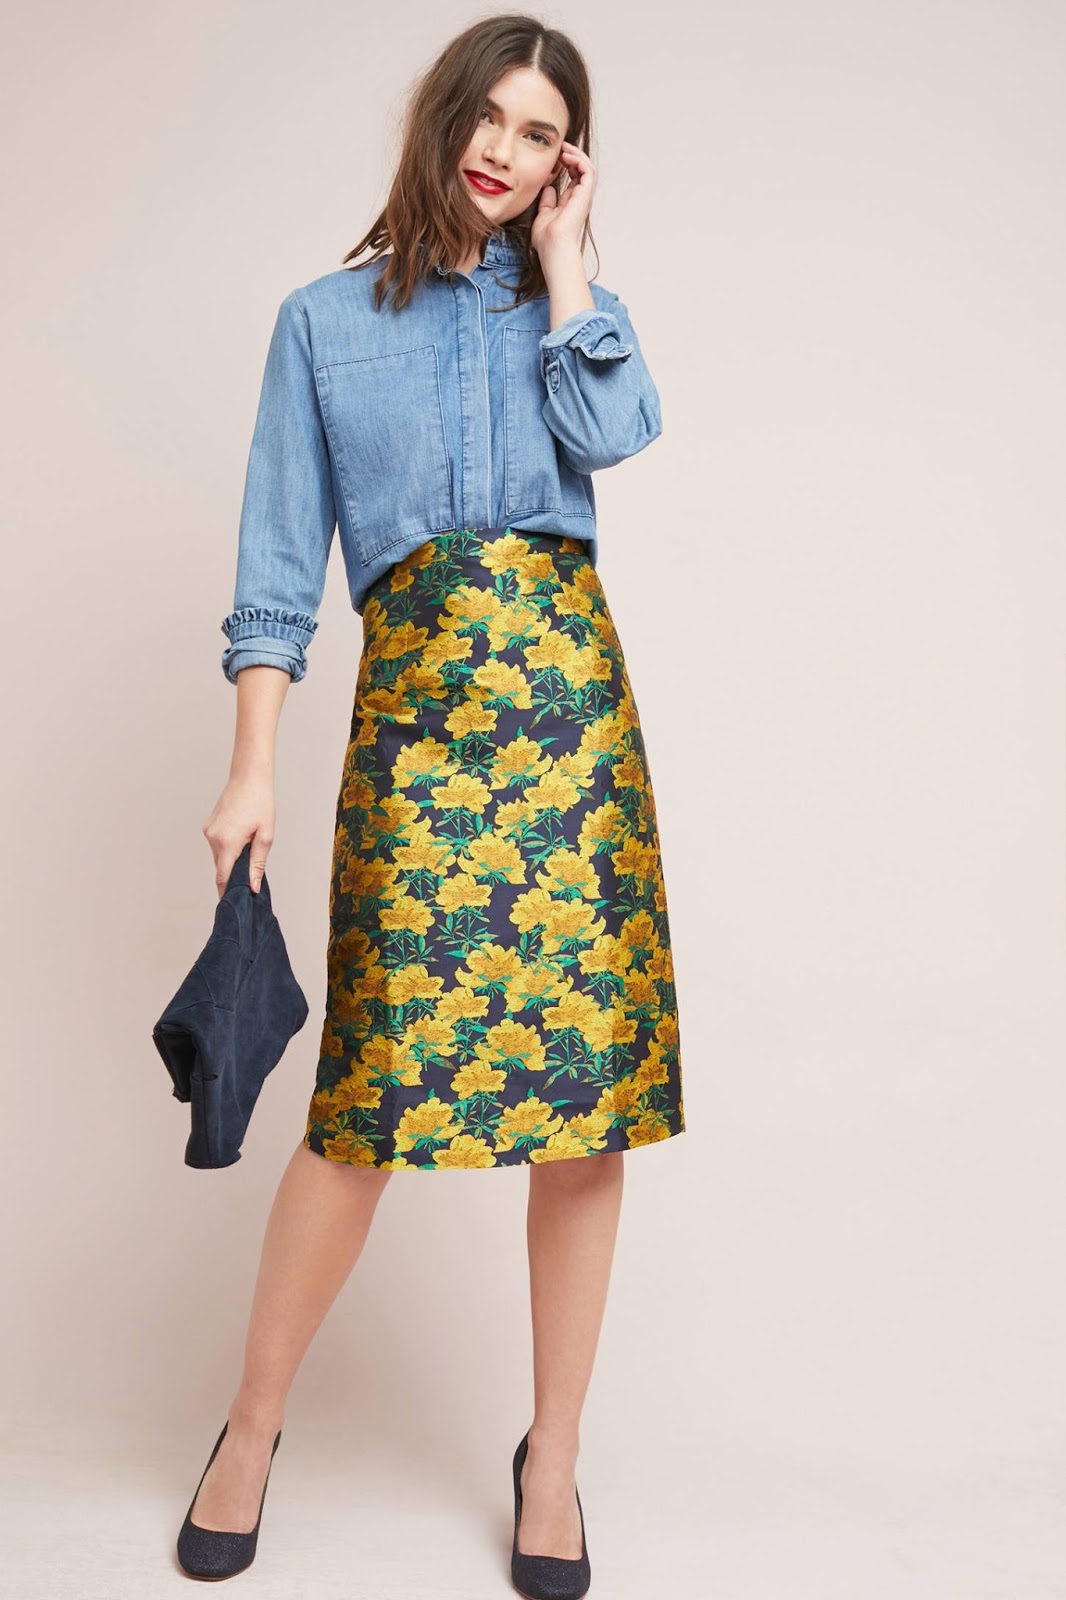 Anthropologie April 2018 Fresh Sale Cuts :: Effortlessly with Roxy